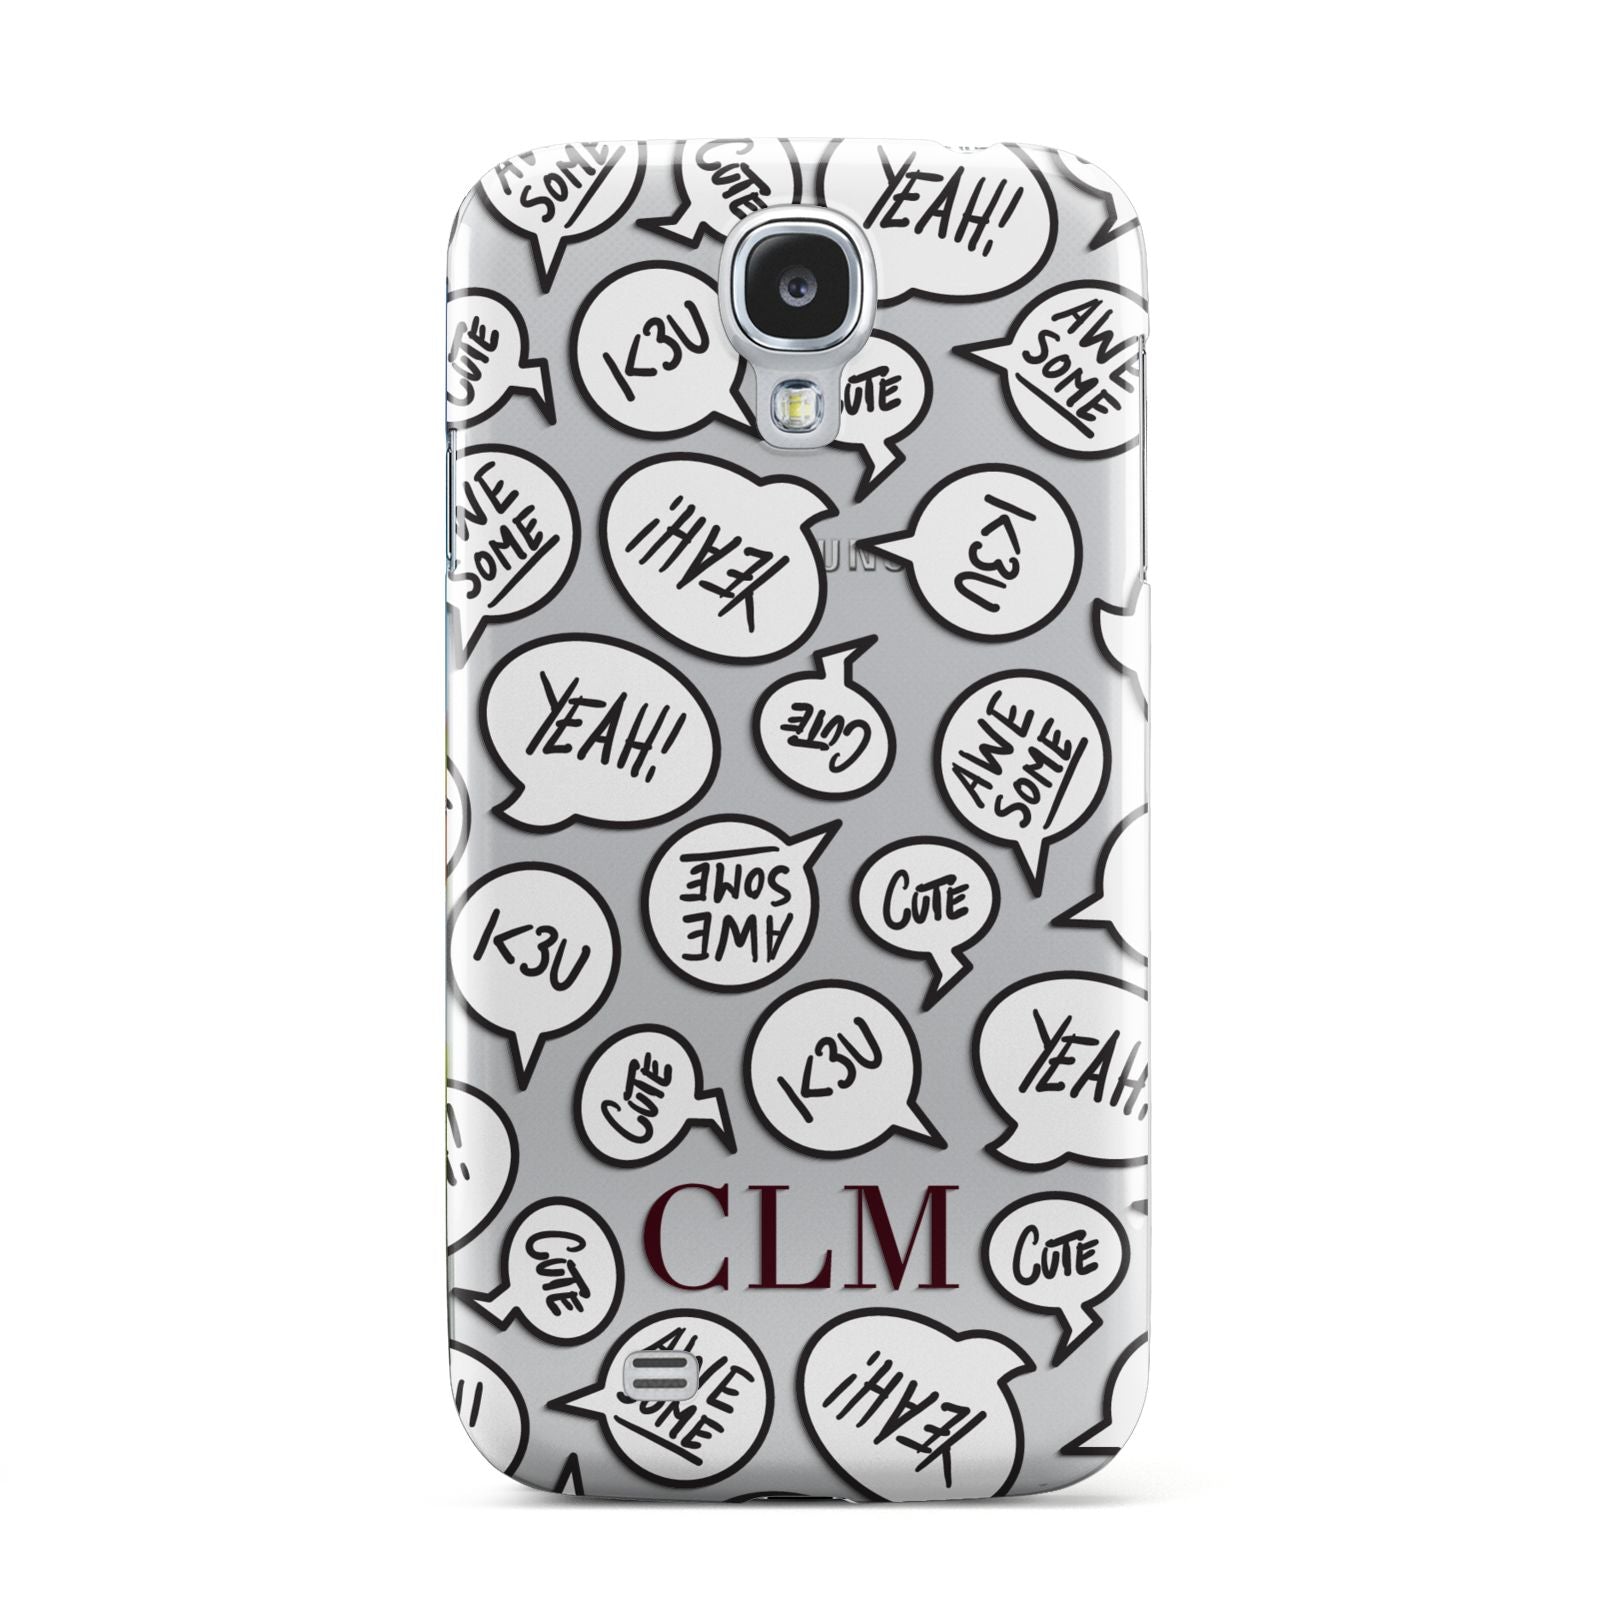 Personalised Sayings With Initials Samsung Galaxy S4 Case